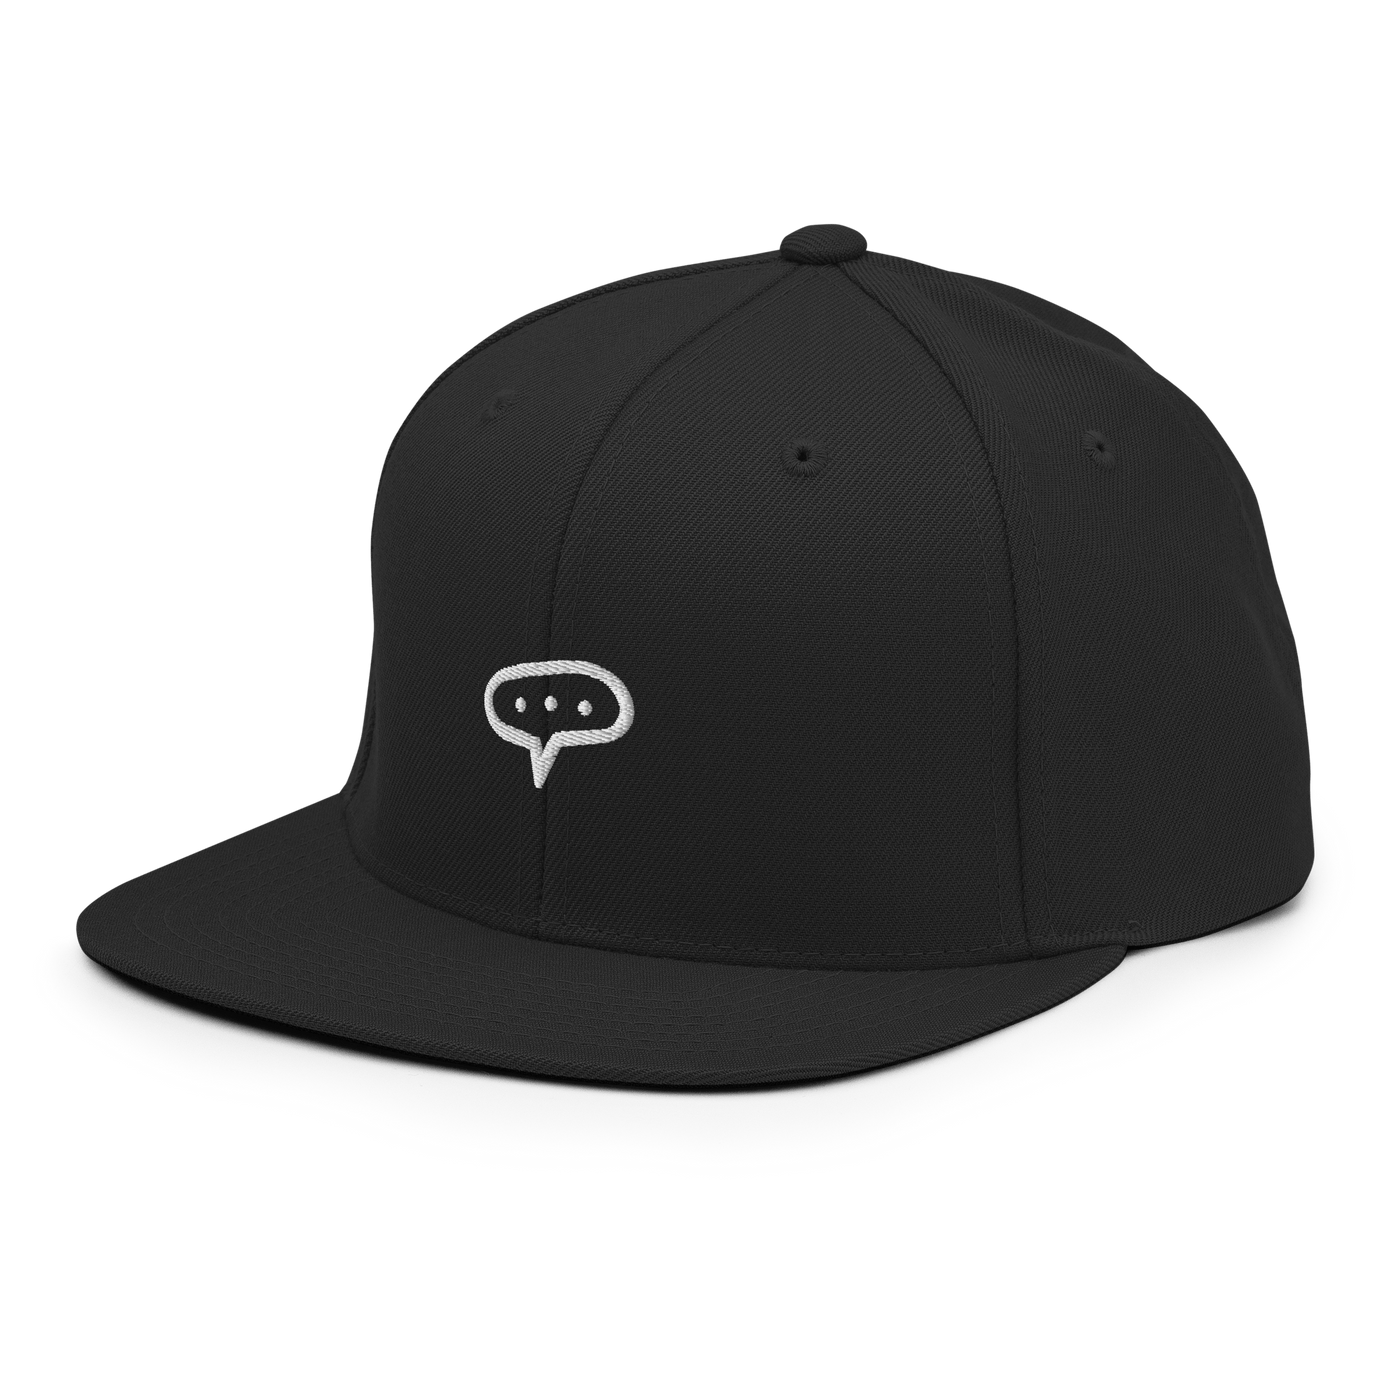 Thinking Snapback Hat - Black - - Just Another Cap Store